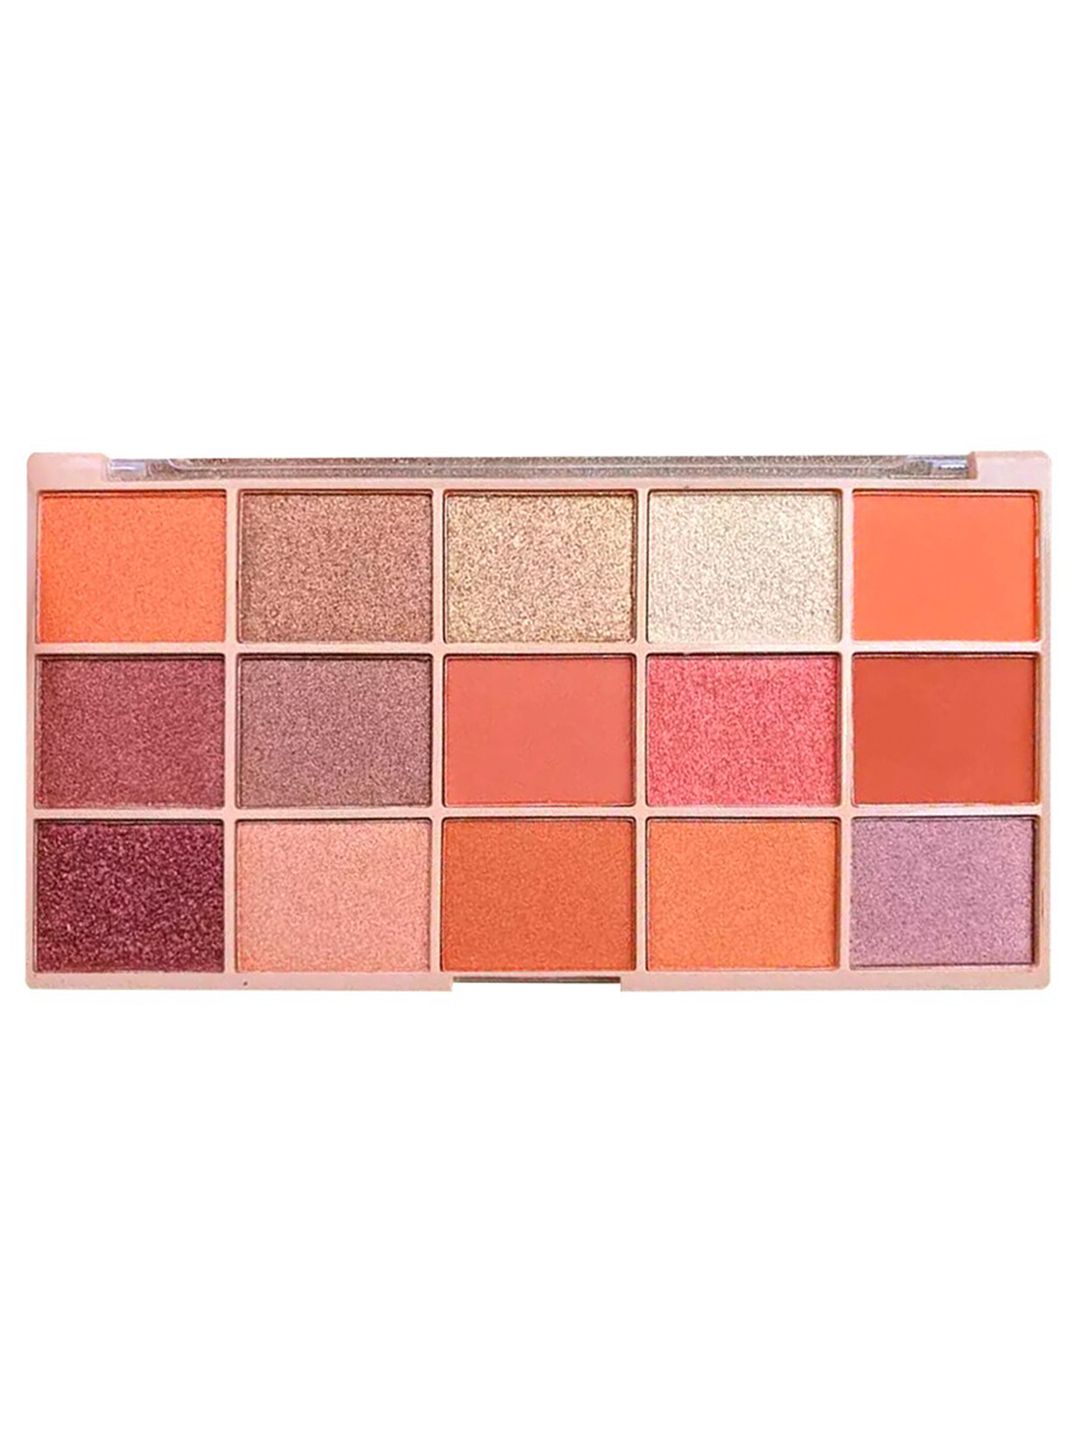 Sivanna Colors Ultra Professional Luxuriant Eye Shadow Palette - HF3011 01 Price in India